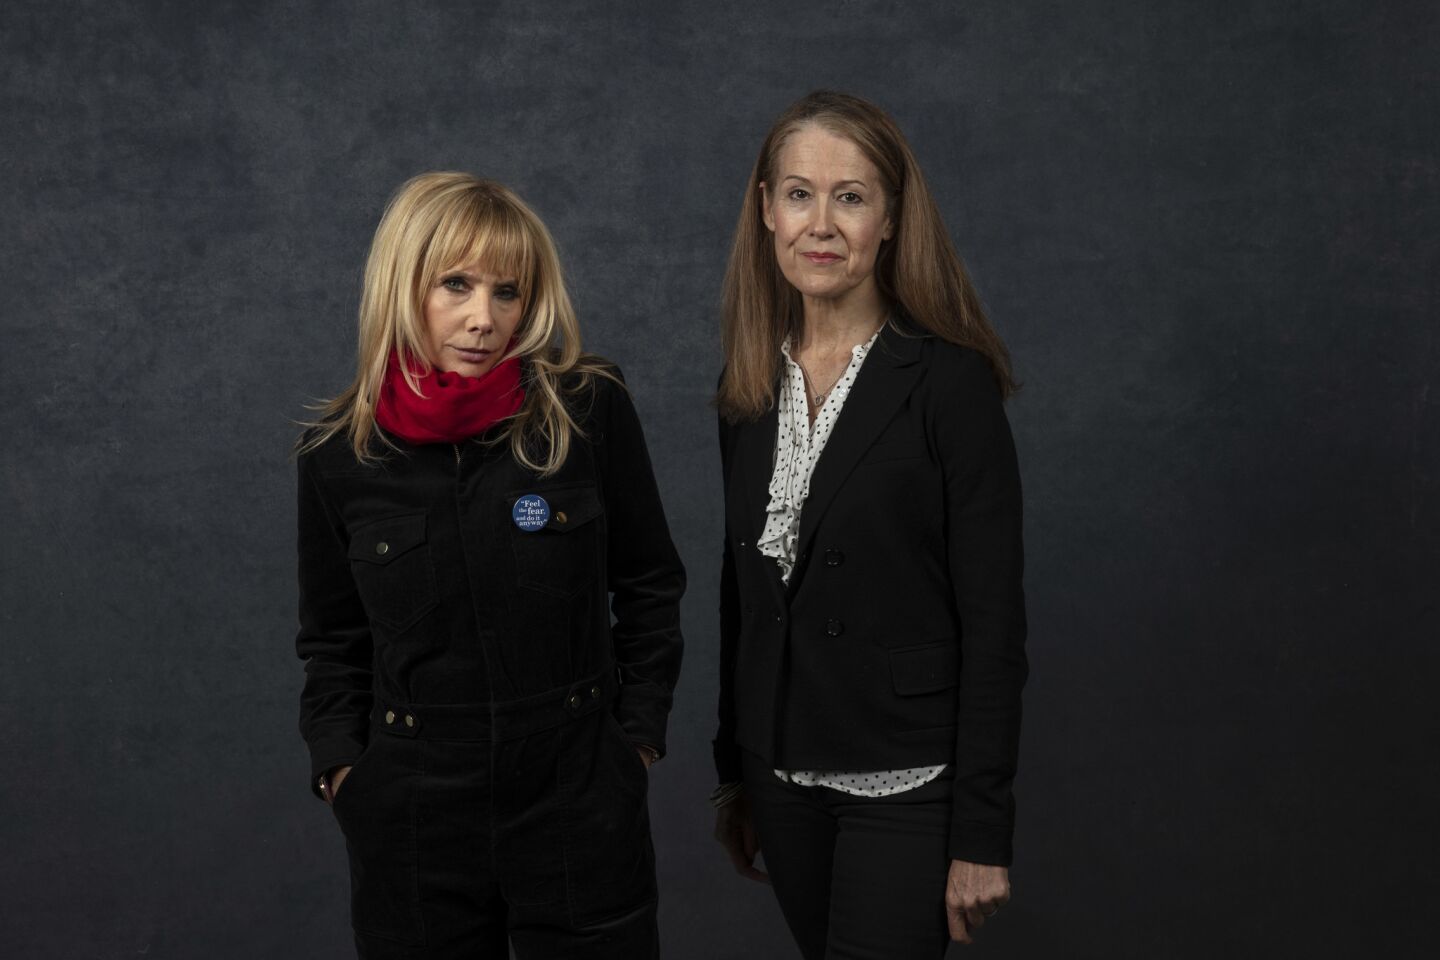 Film subject Rosanna Arquette, left, and director Ursula Macfarlane, from the documentary "Untouchable," photographed at the 2019 Sundance Film Festival in Park City, Utah, on Friday, Jan. 25.